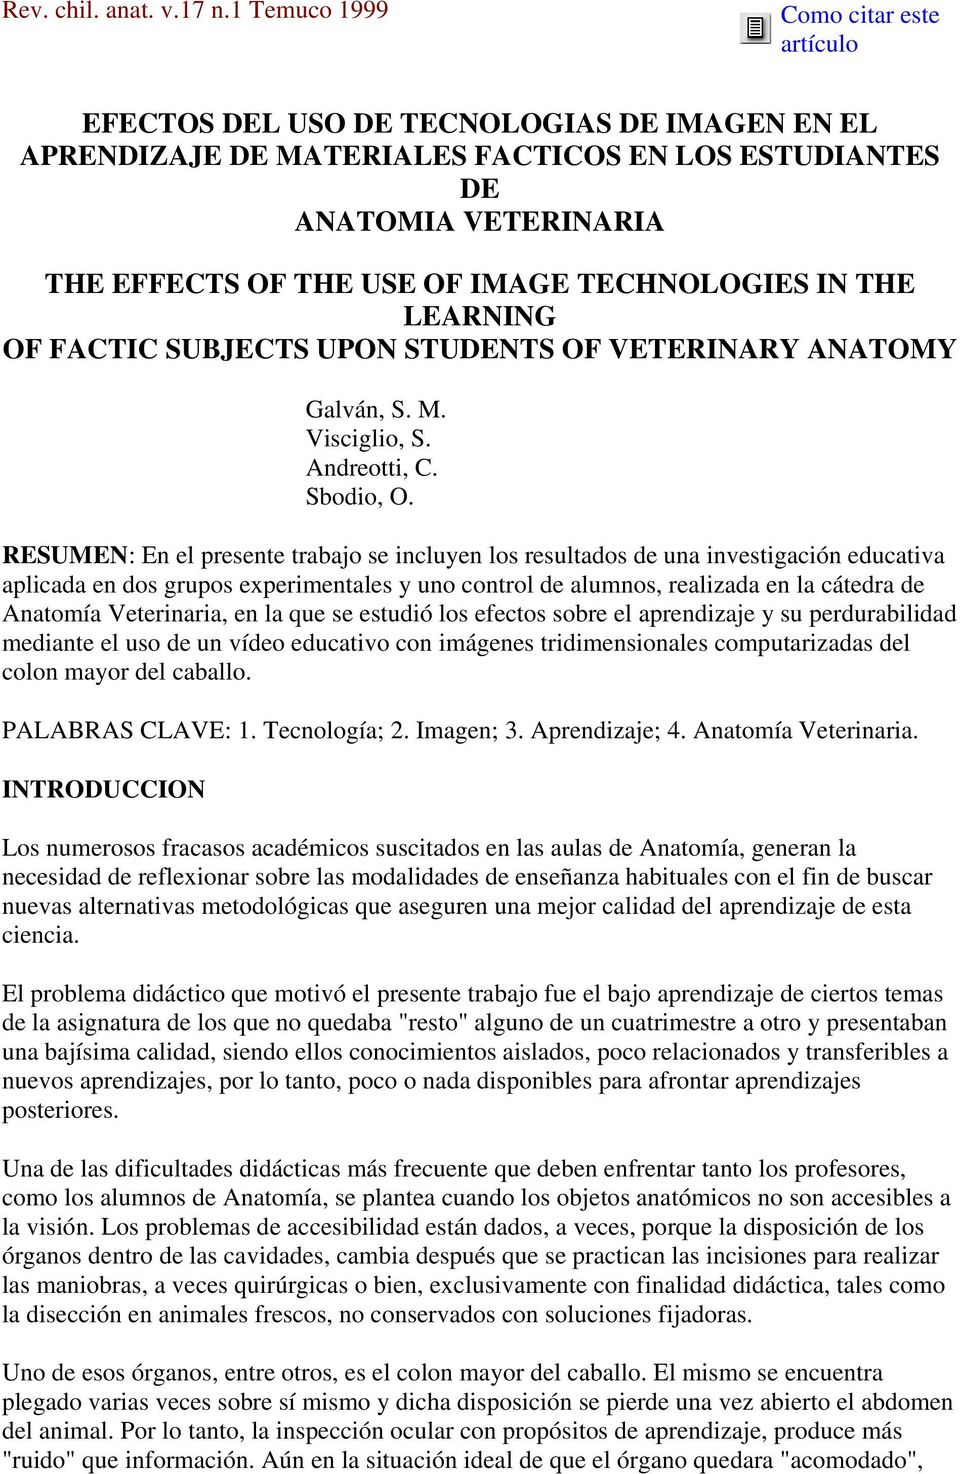 TECHNOLOGIES IN THE LEARNING OF FACTIC SUBJECTS UPON STUDENTS OF VETERINARY ANATOMY Galván, S. M. Visciglio, S. Andreotti, C. Sbodio, O.